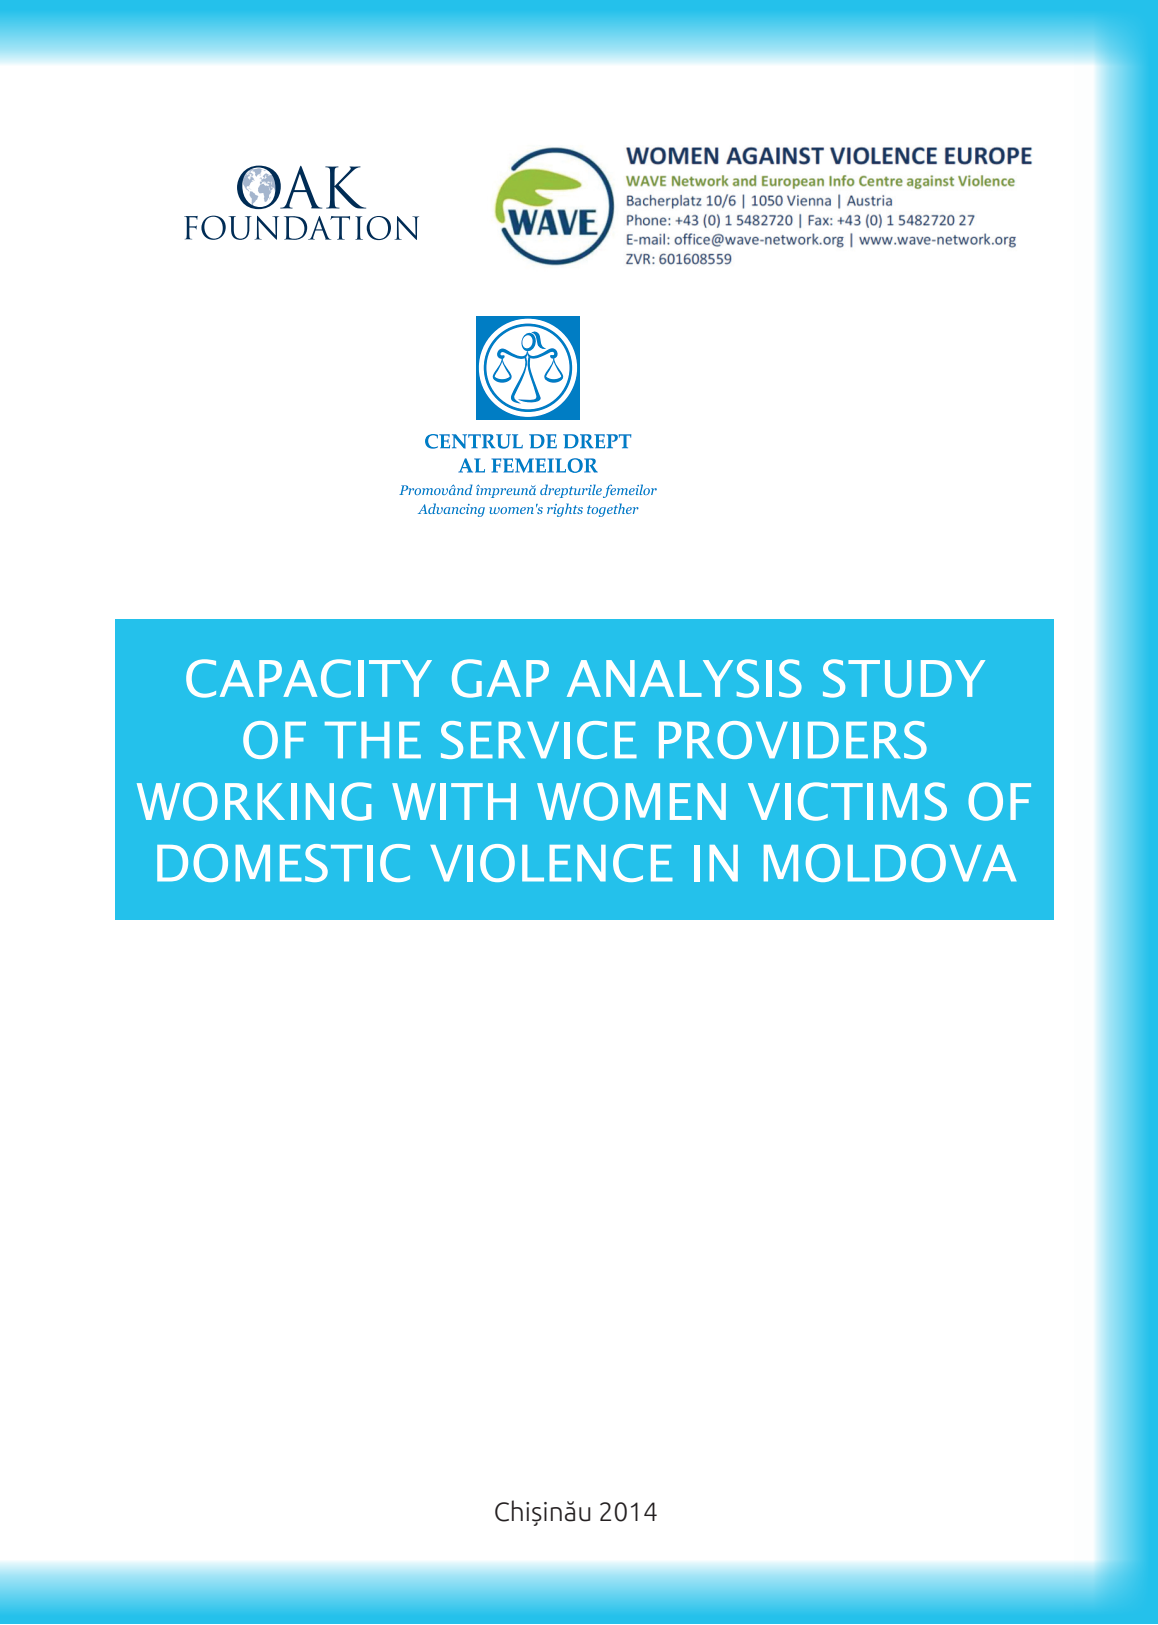 Capacity gap analysis study of the service providers working with women victims of domestic violence in Moldova